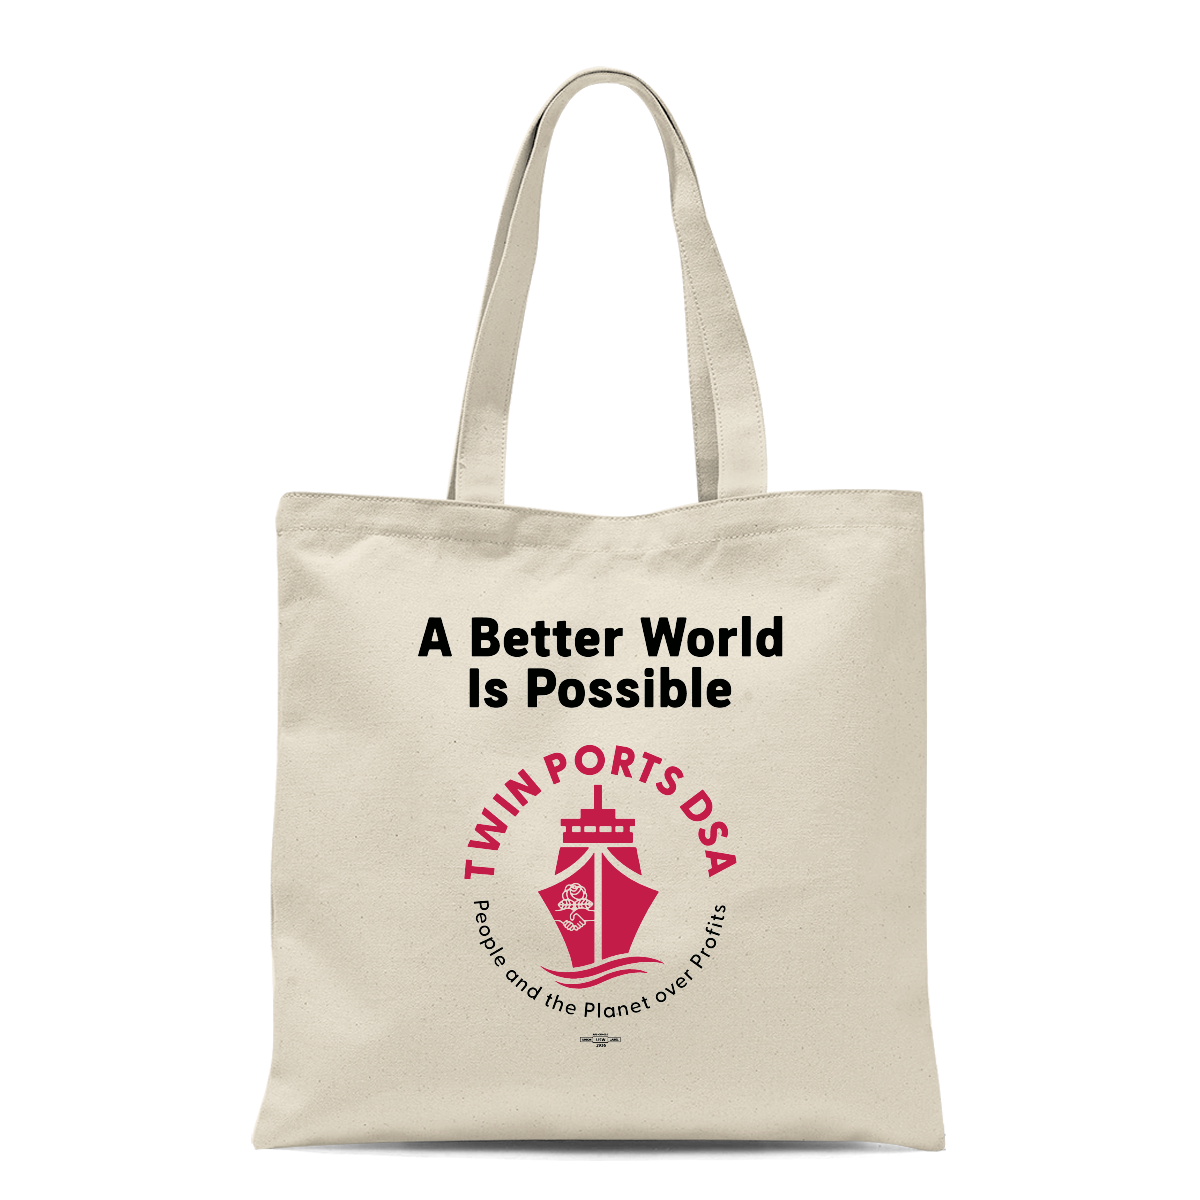 A Better World is Possible Tote